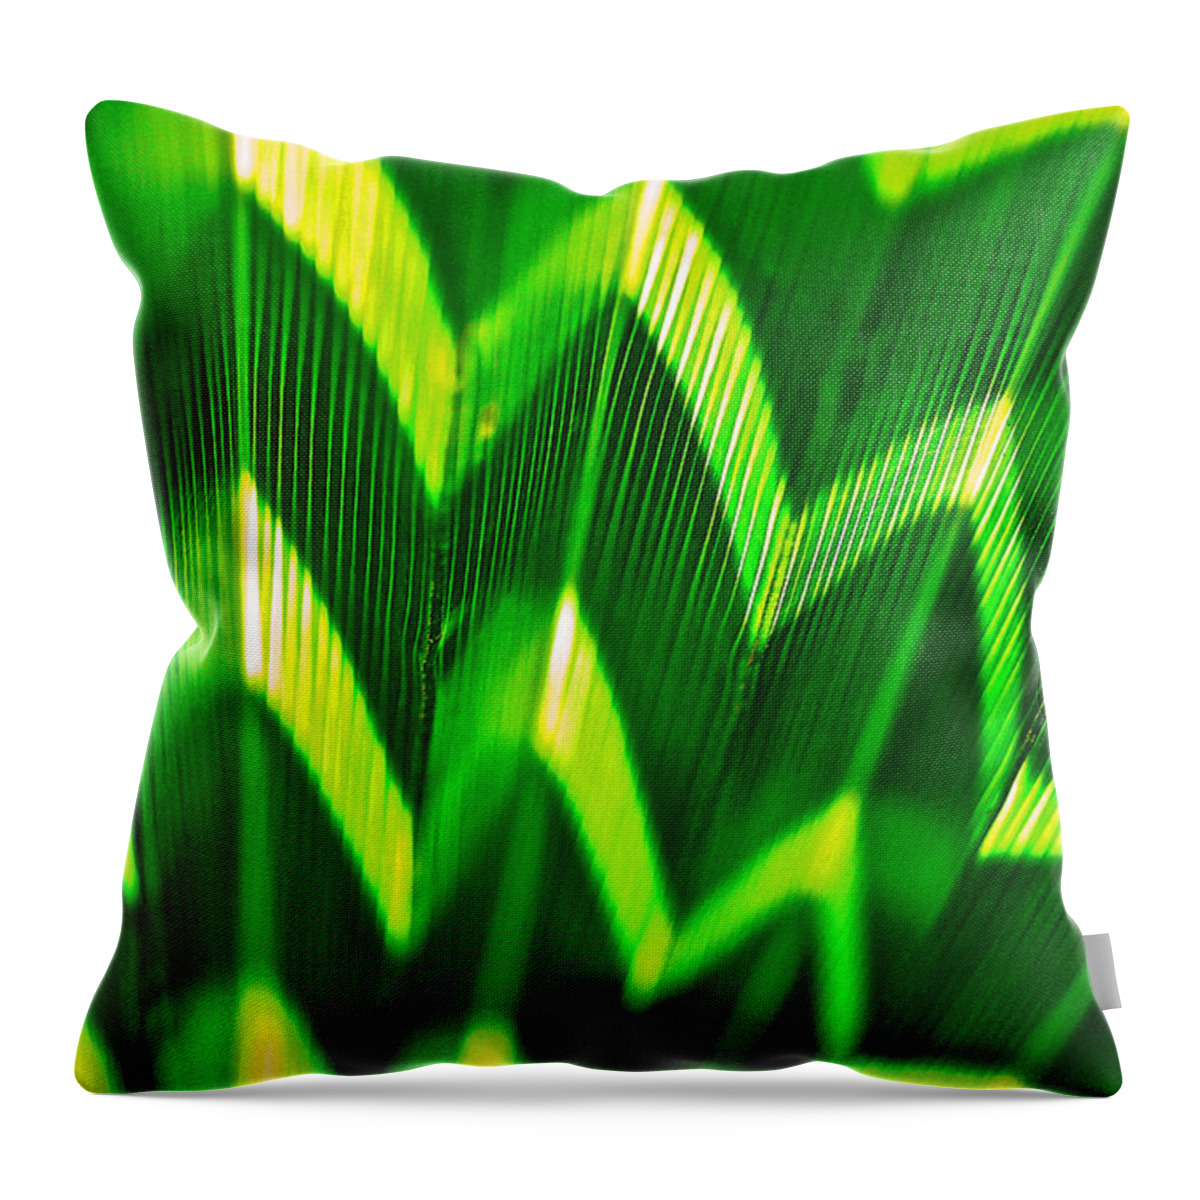 Palm Leaf Throw Pillow featuring the photograph Palm Abstract by Michael Cinnamond